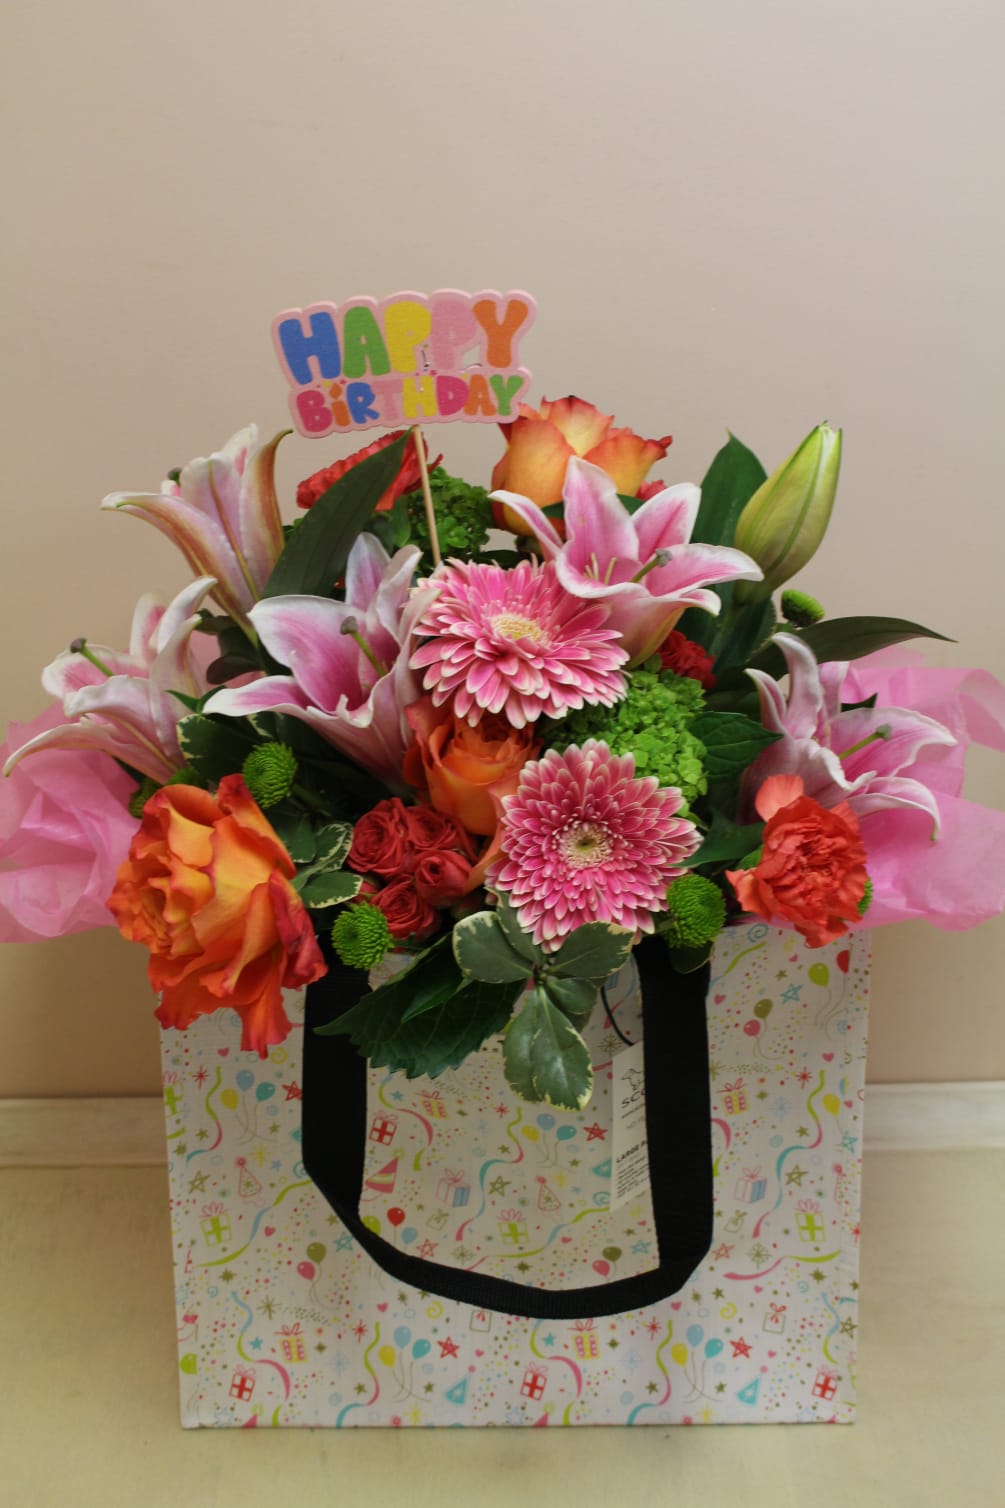 Say Happy Birthday with a great gift, flowers and a festive bag!

The